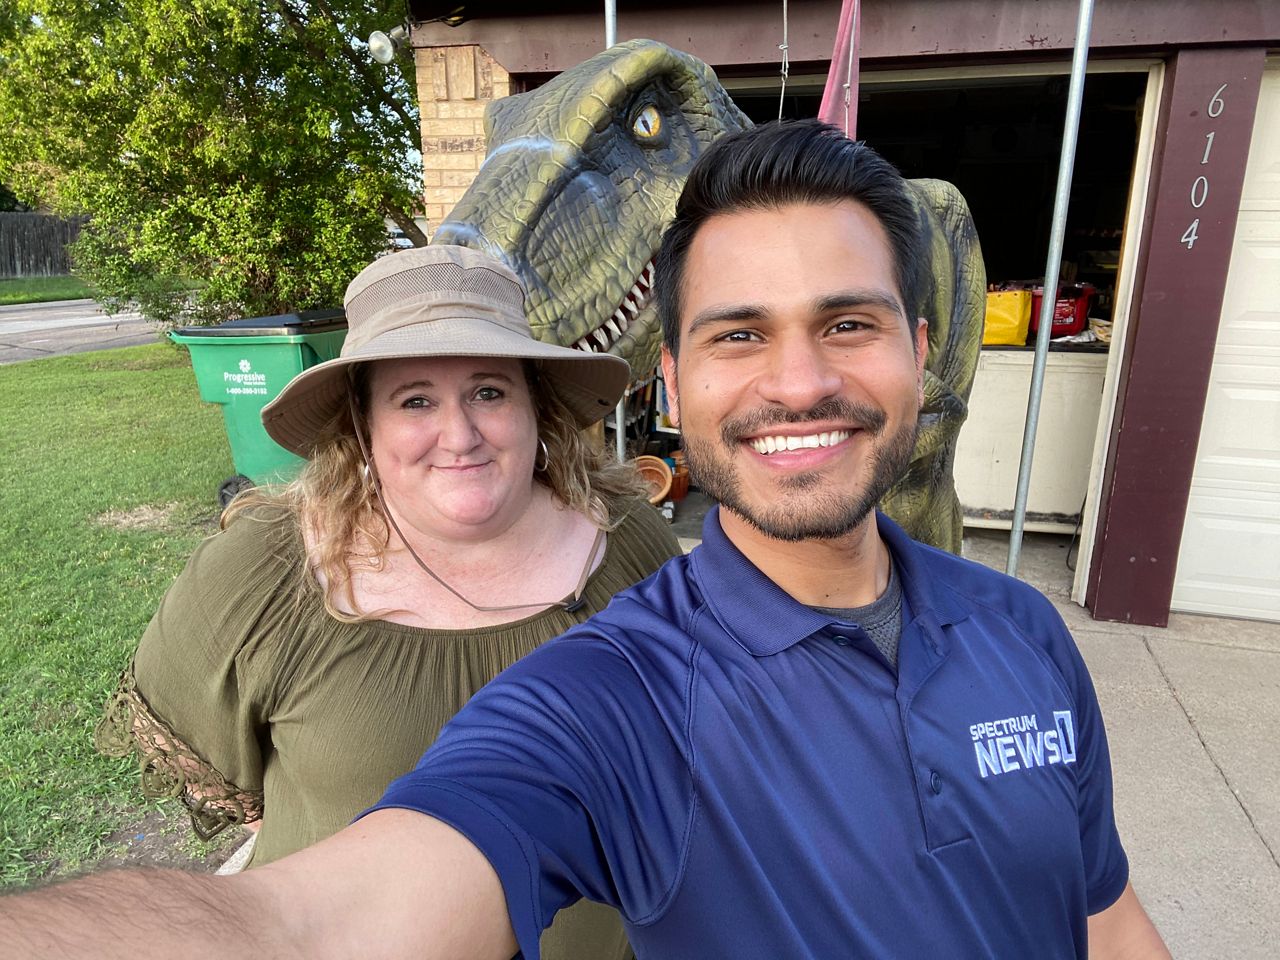 Pictured is Spectrum News 1 Texas human interest reporter Lupe Zapata and Watauga, Texas, resident Krysti Burton with Norman the 8-foot-tall dinosaur. Burton is the owner of Dino-Adventure, offering the realistic human-operated walking dinosaur for parties and events. (Spectrum News 1/ Lupe Zapata)